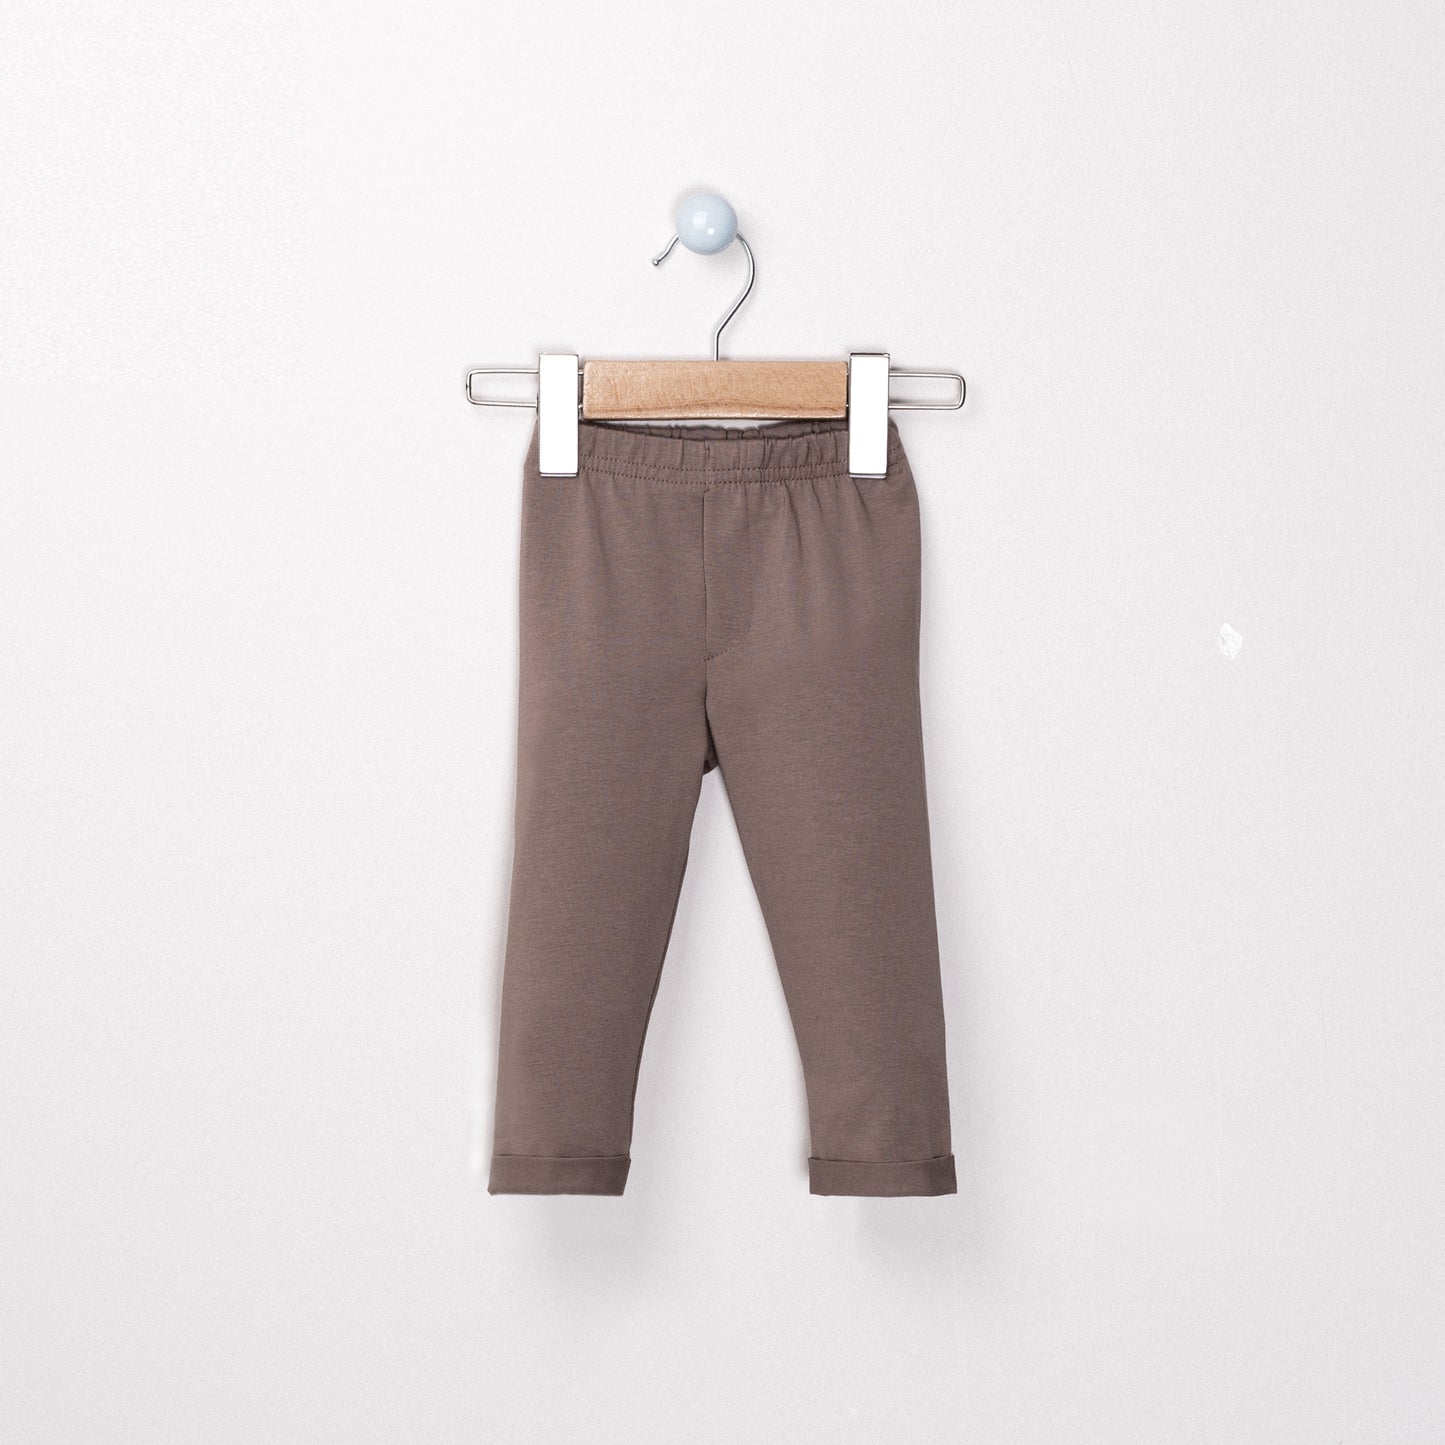 Modal Pants- Aged 3 M to 5 Yrs- Colored Brown